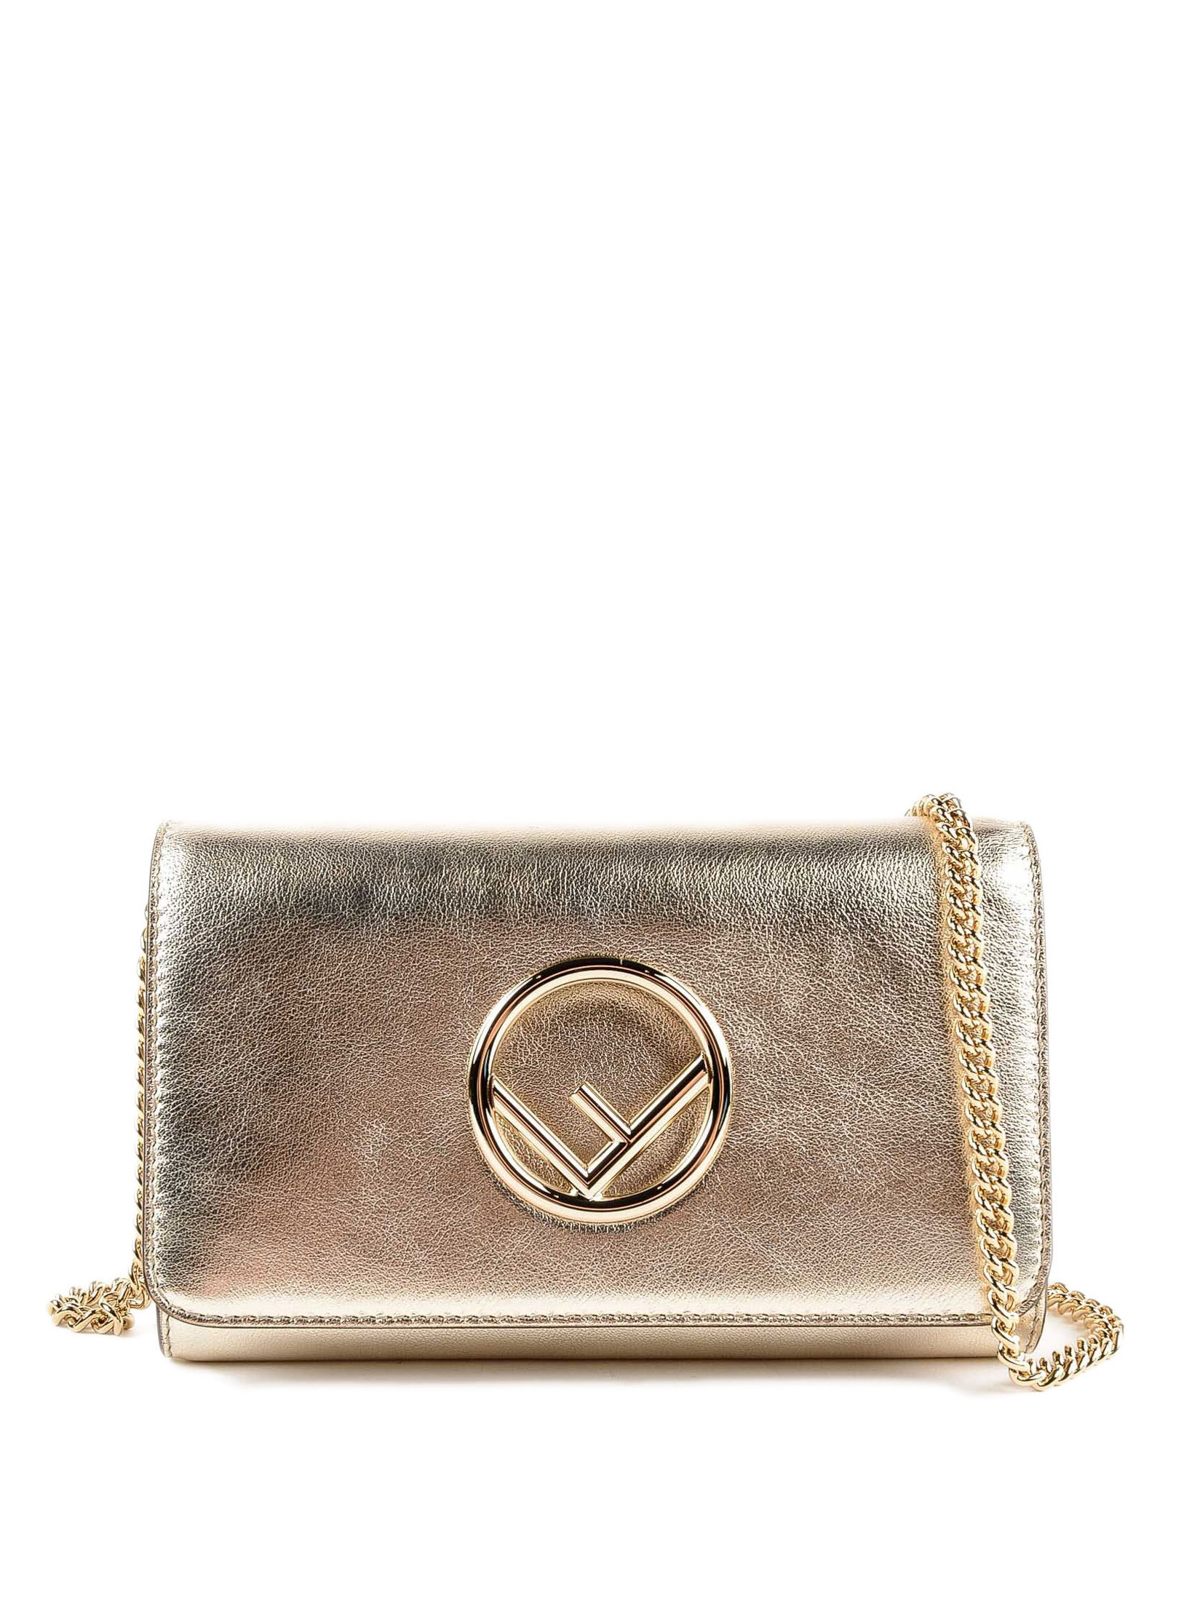 Wallets & purses Fendi - Wallet On Chain champagne leather wallet -  8BS012A0Y1MZV